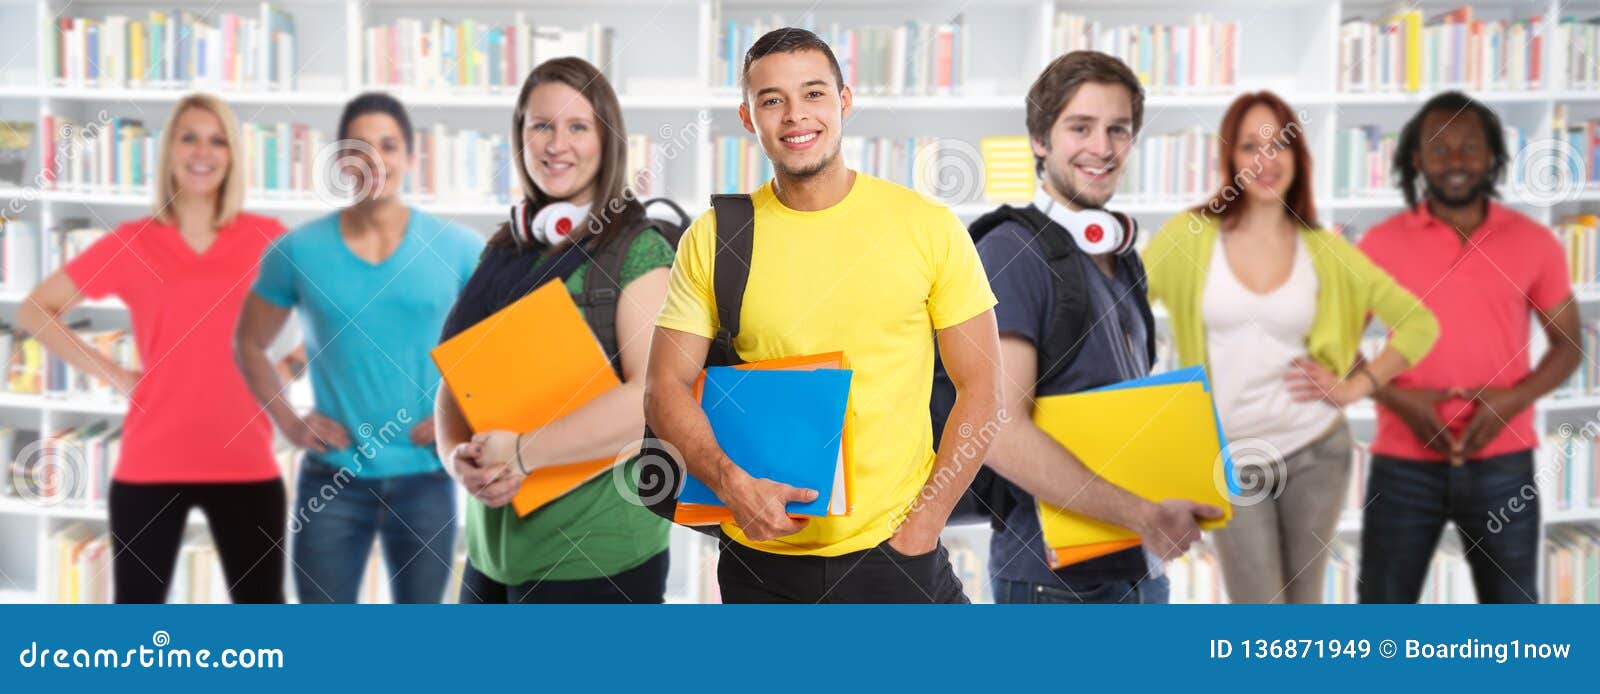 group of students college student young people studies library learning banner education smiling happy